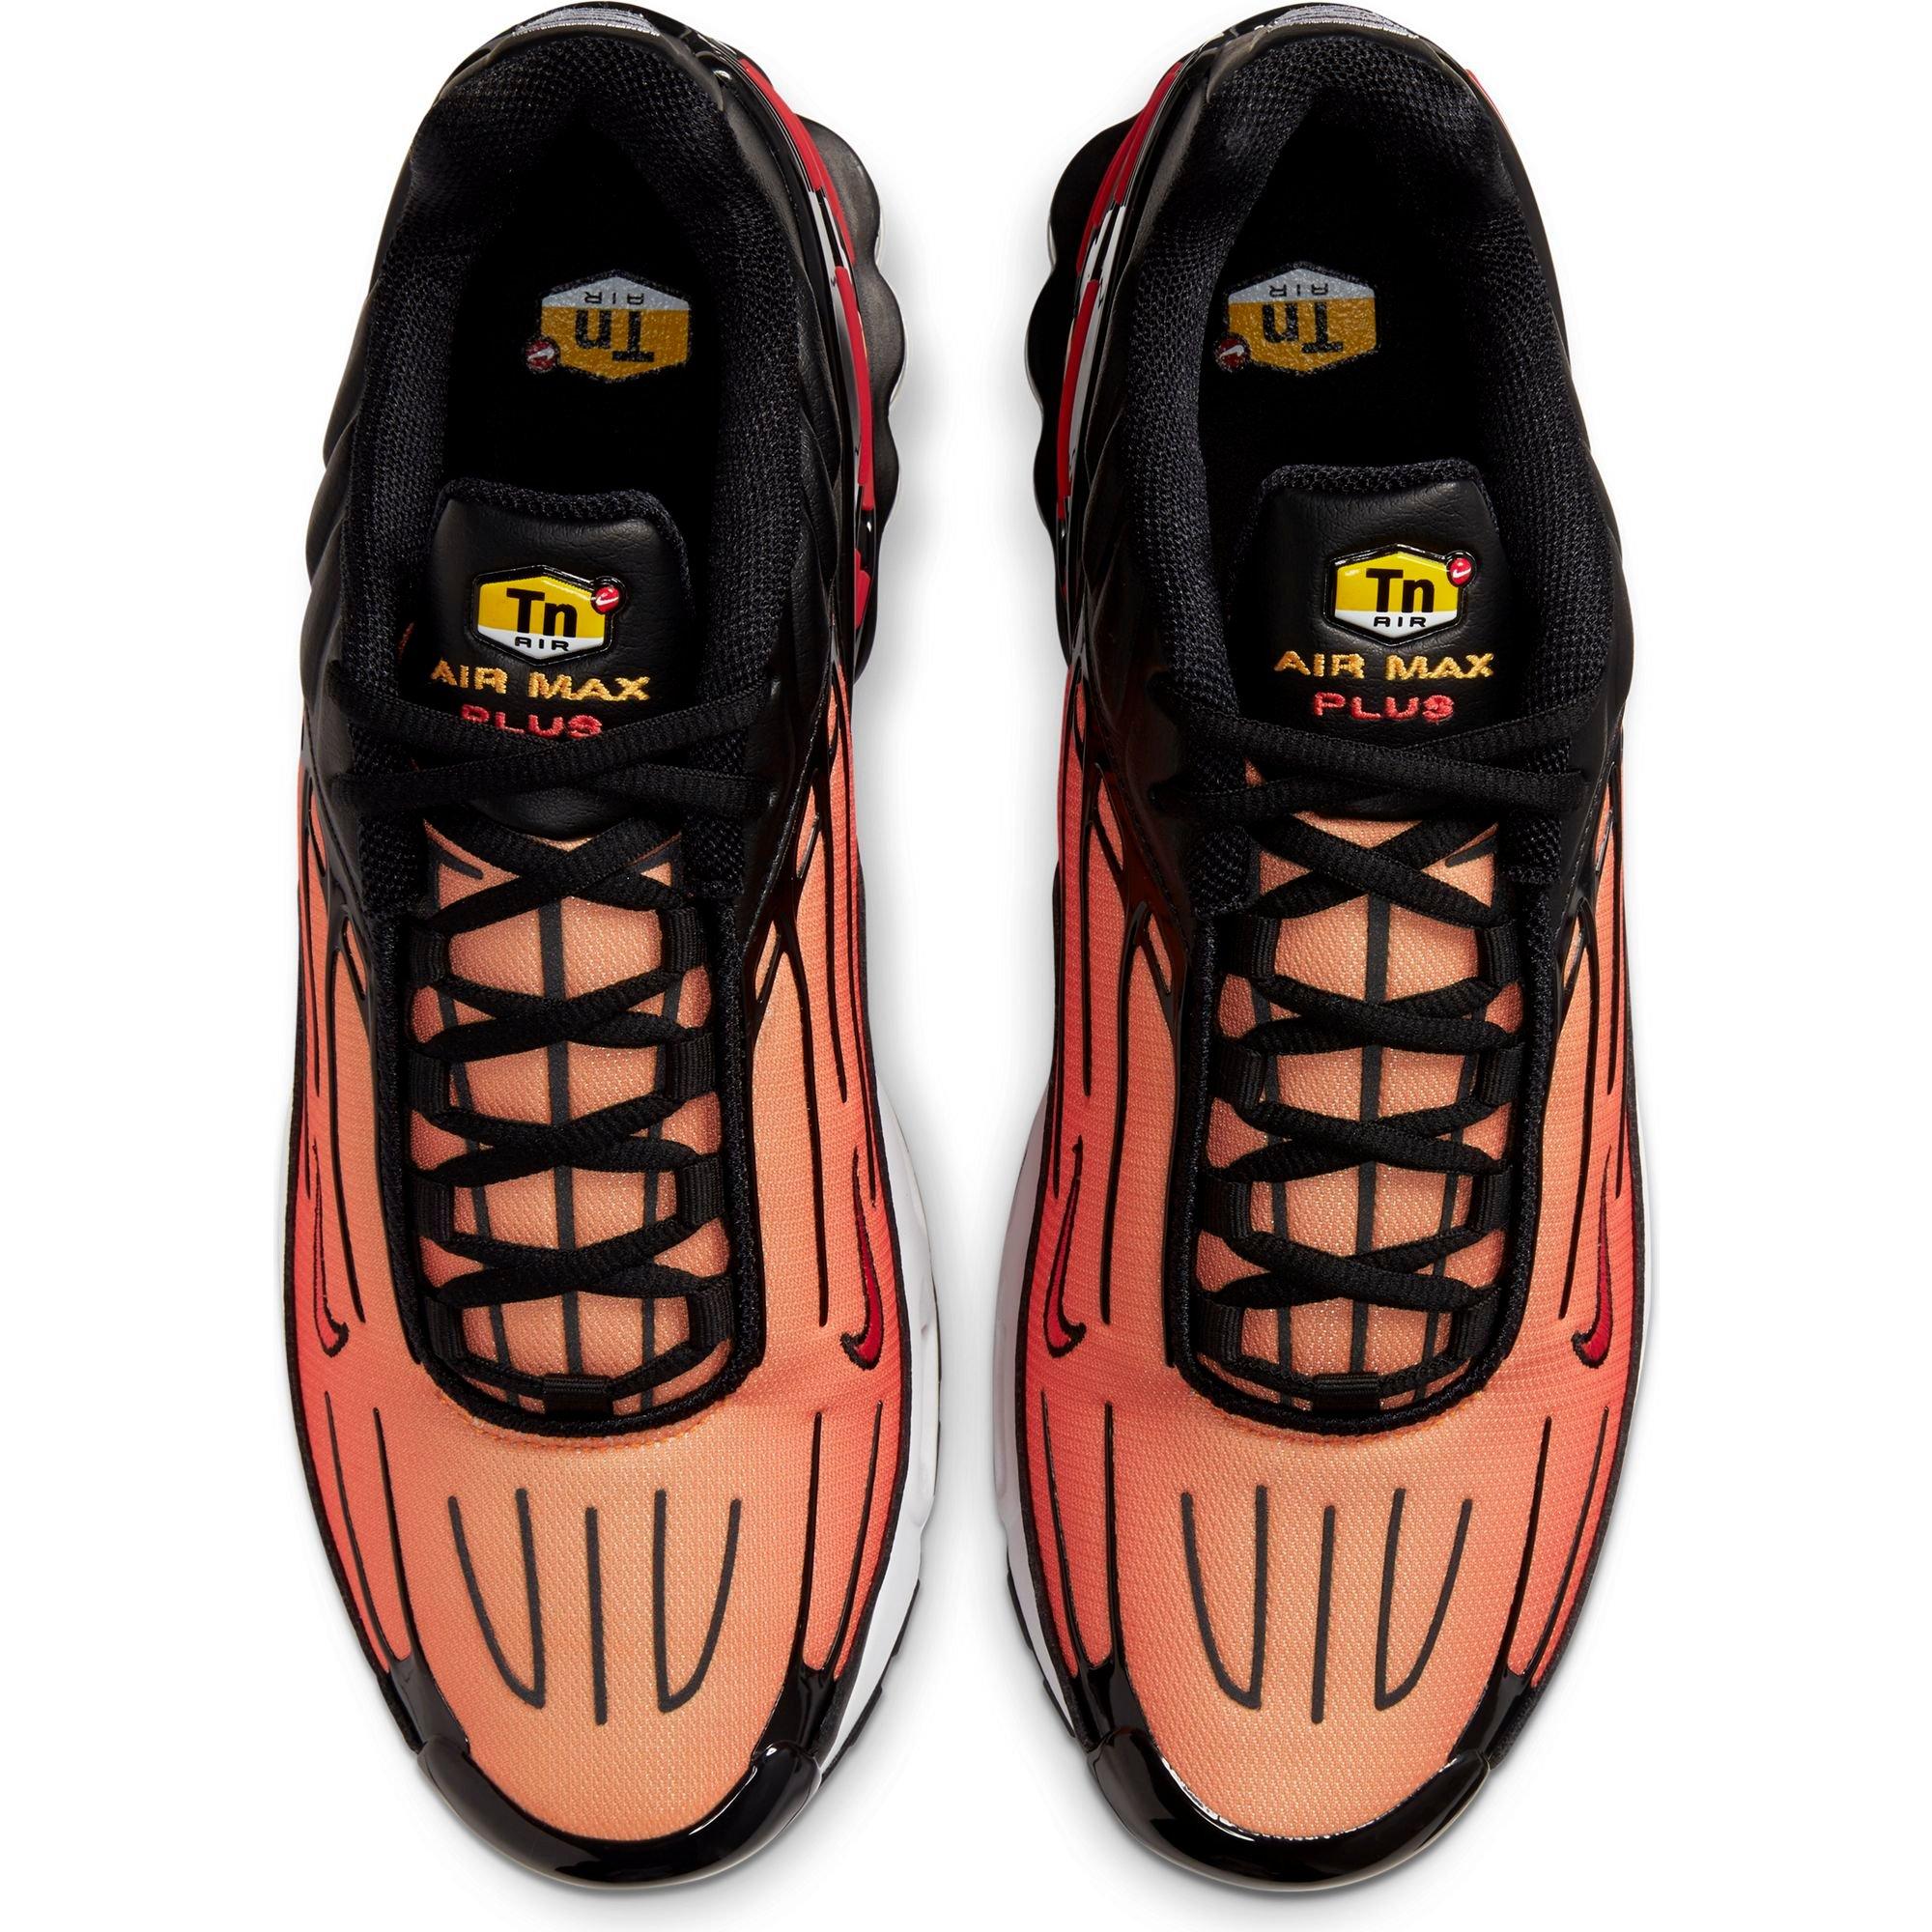 Nike Air Max Plus 3 Sunset (Pimento) Review